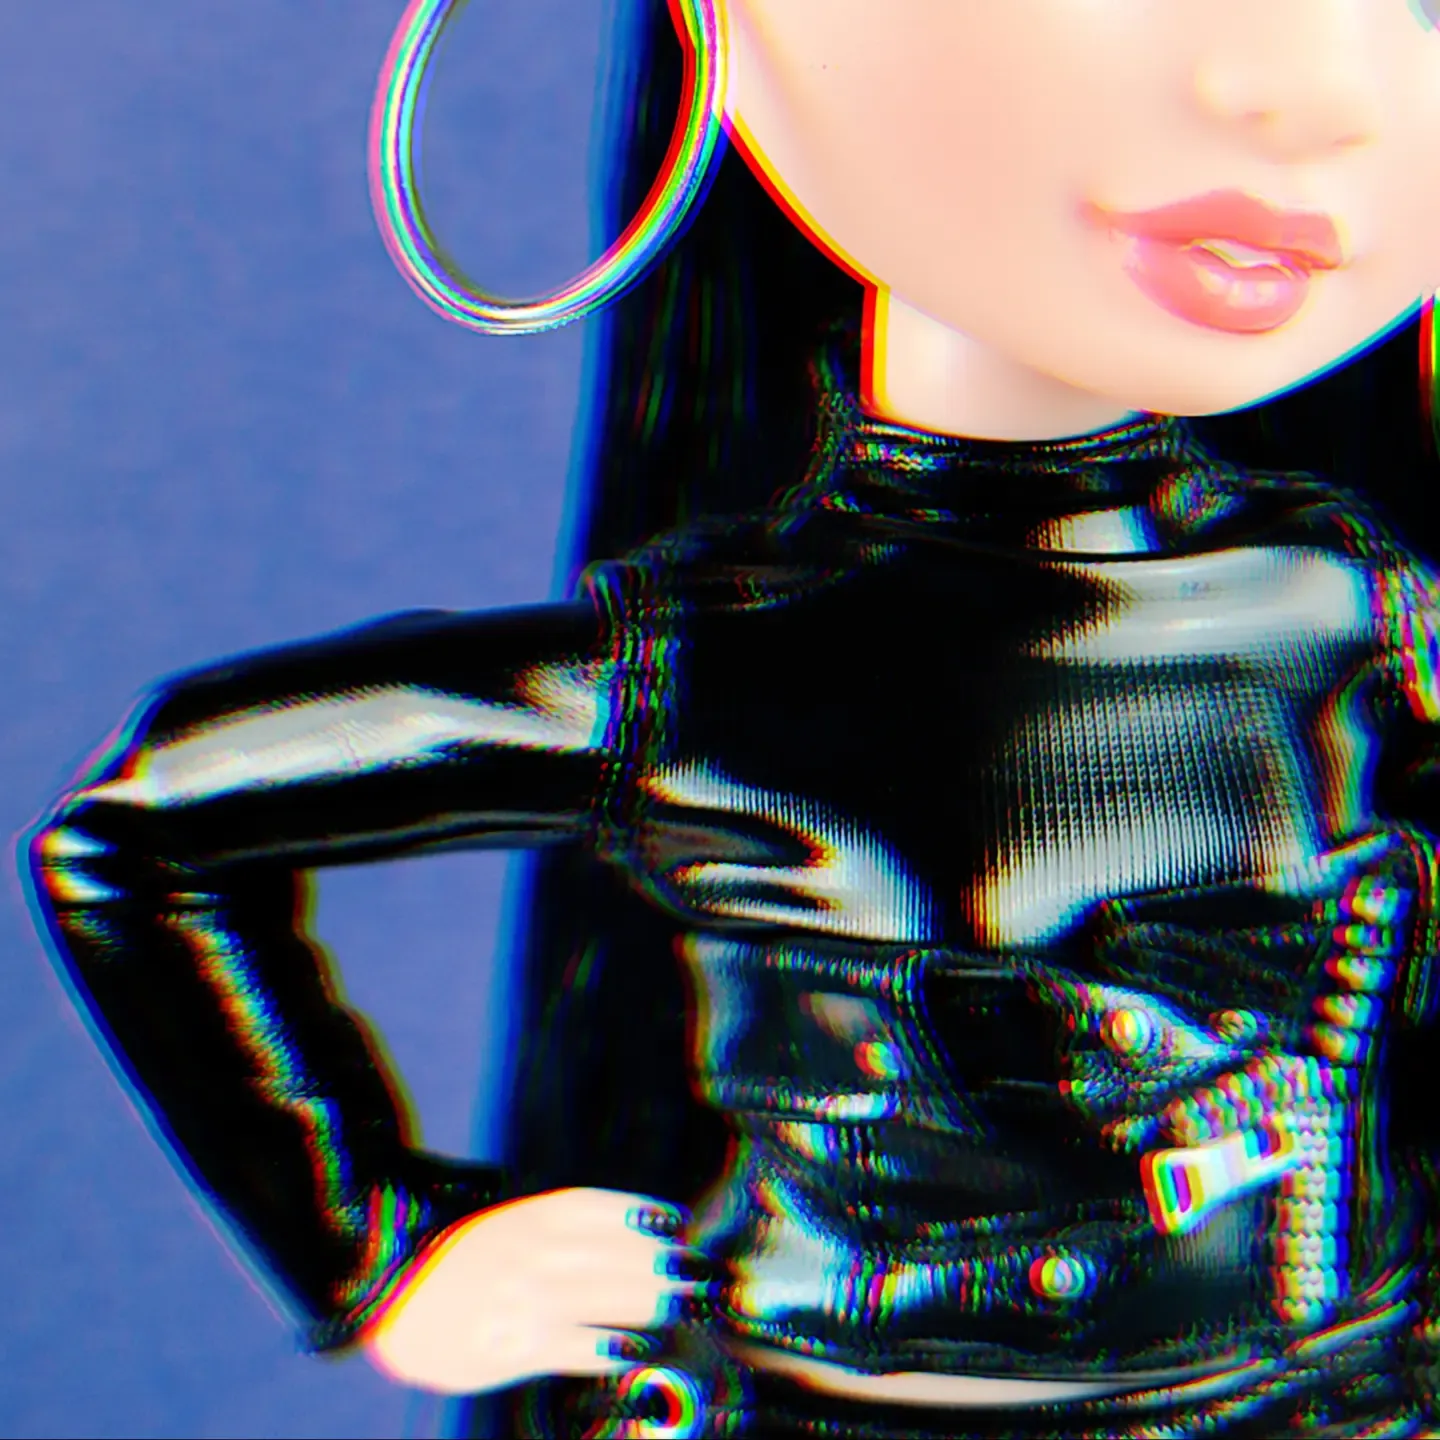 I bought a always bratz yasmine doll on LolSuprise.com when it came she  turned out with straight bangs not curly sadly : r/Bratz